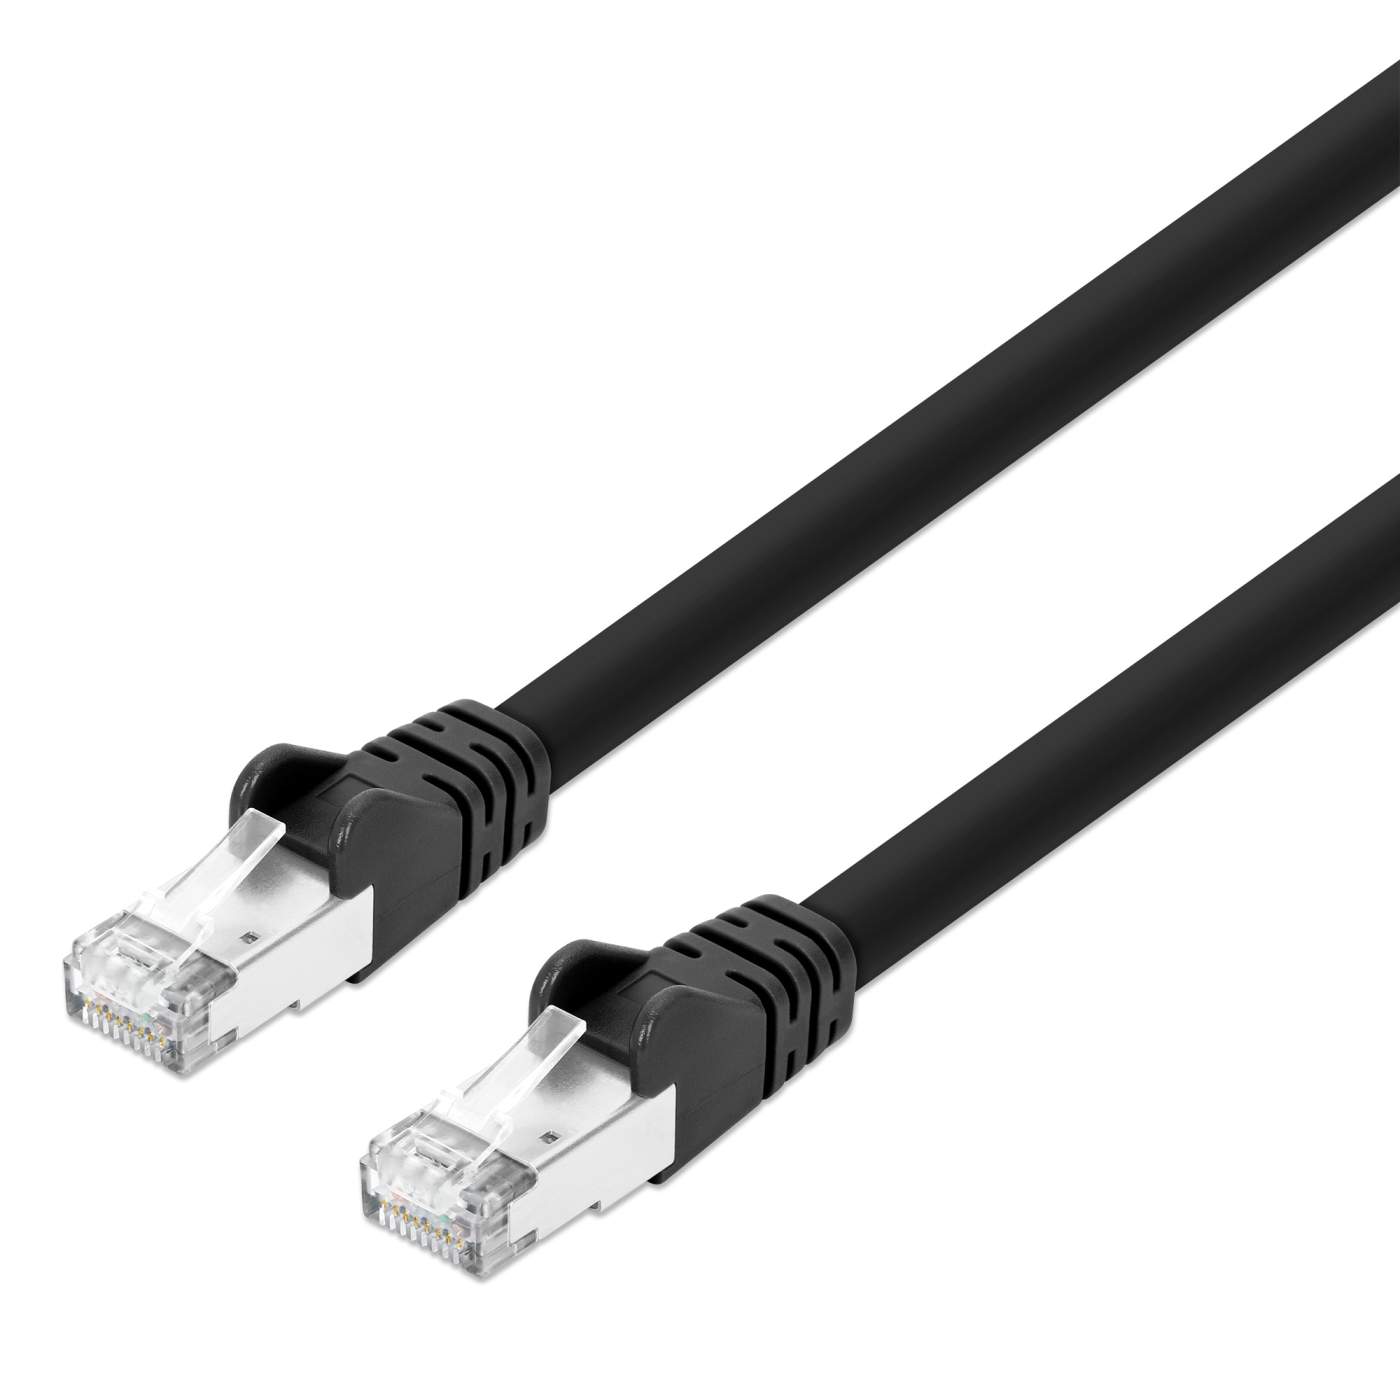 Cat8.1 S/FTP Network Patch Cable, 25 ft., Black Image 1